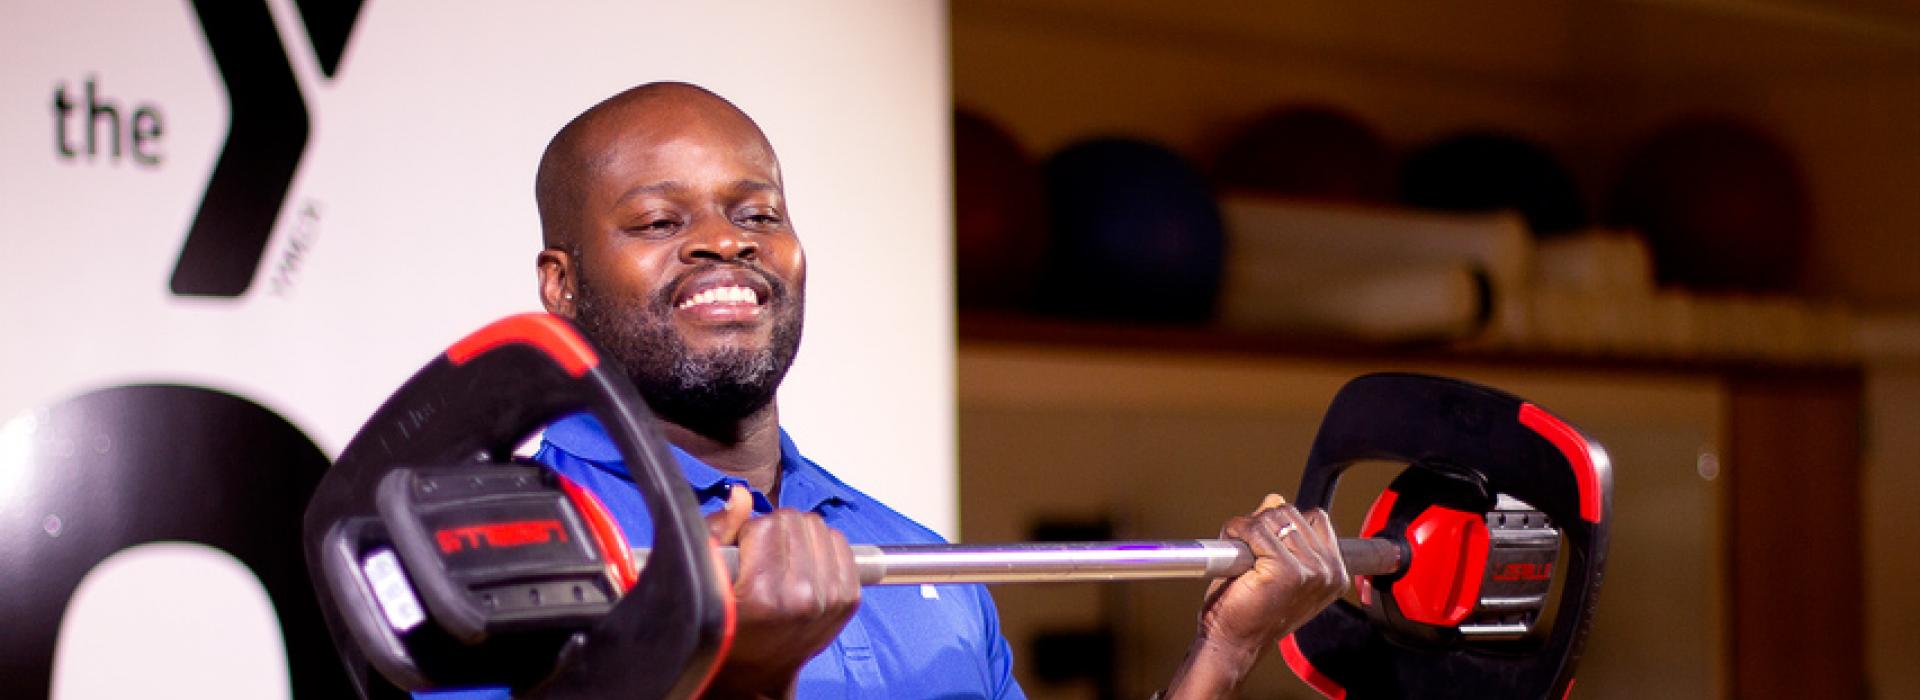 Weight training at the YMCA of Greater Brandywine does not have to scary, personal trainer Chris Robinson is here to help.